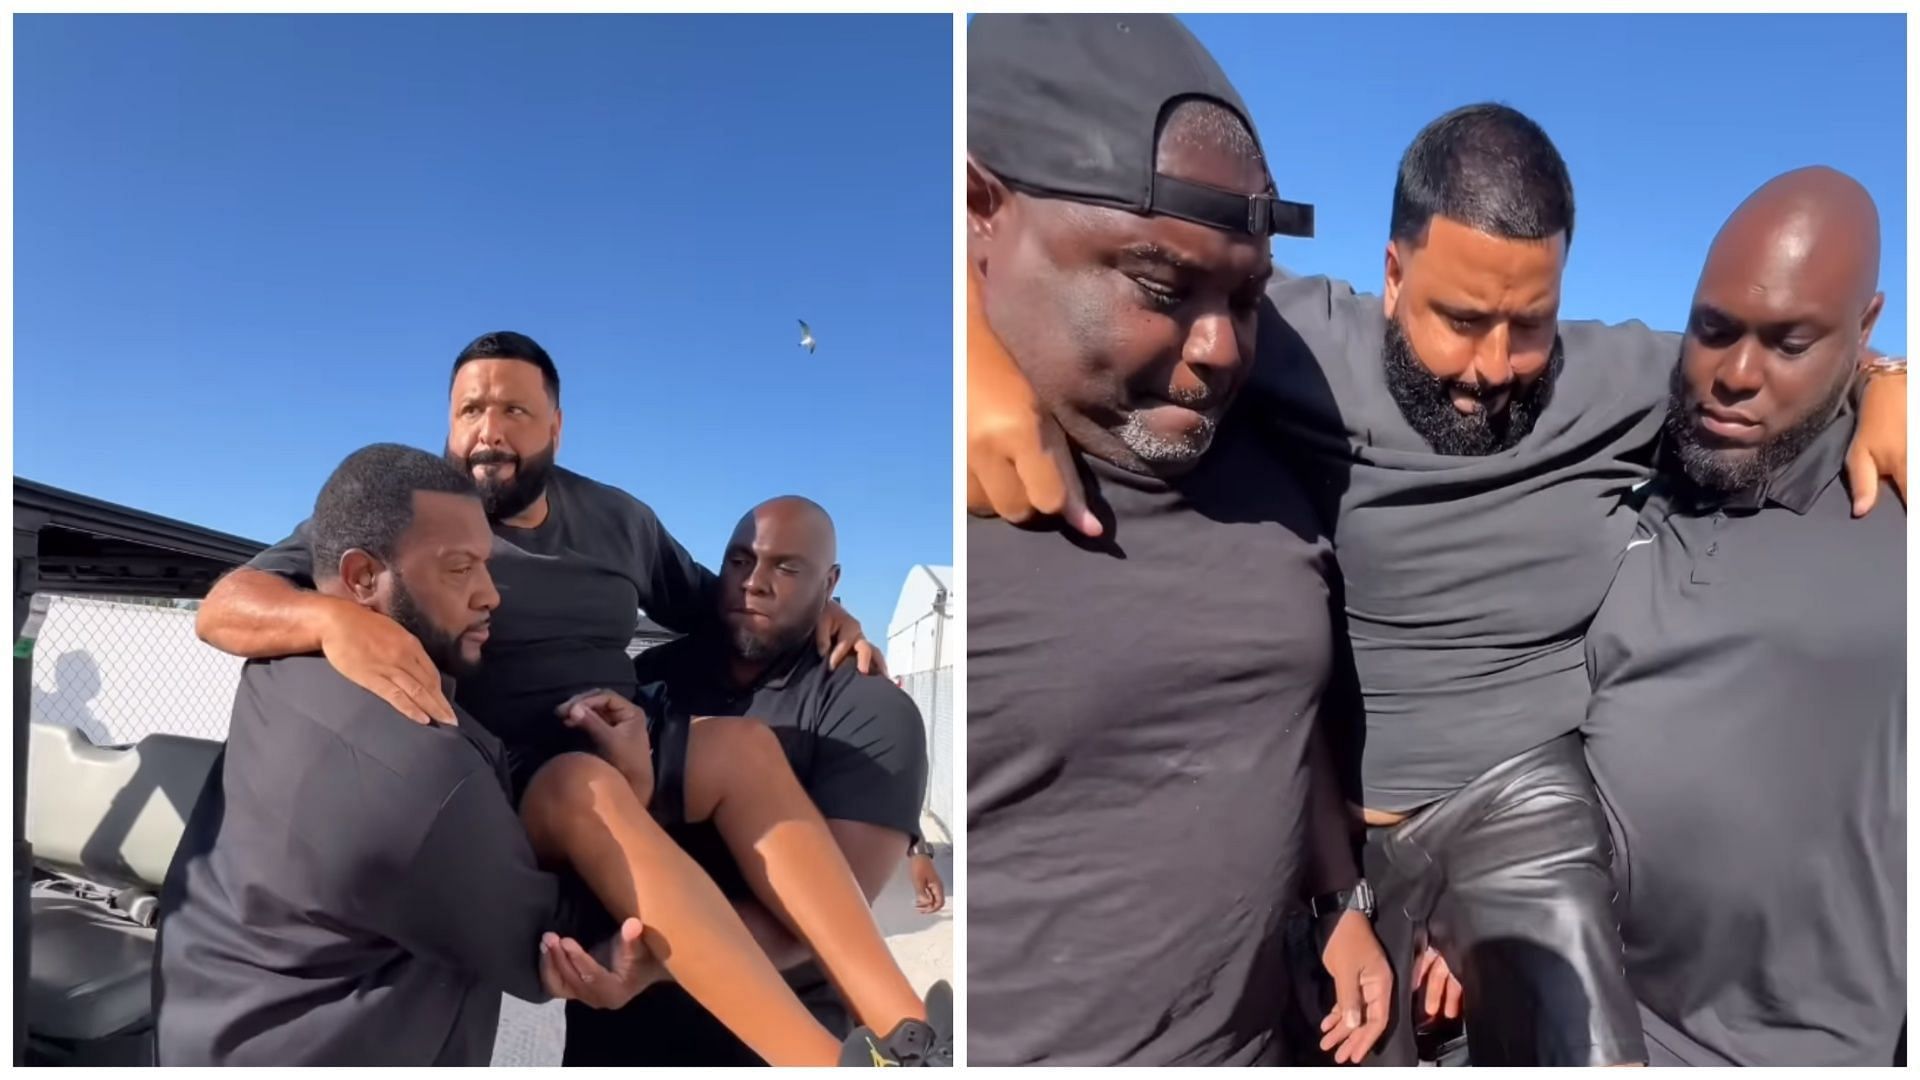 DJ Khaled receives backlash for getting carried by his security guards twice (Image via Instagram/@djkhaled)